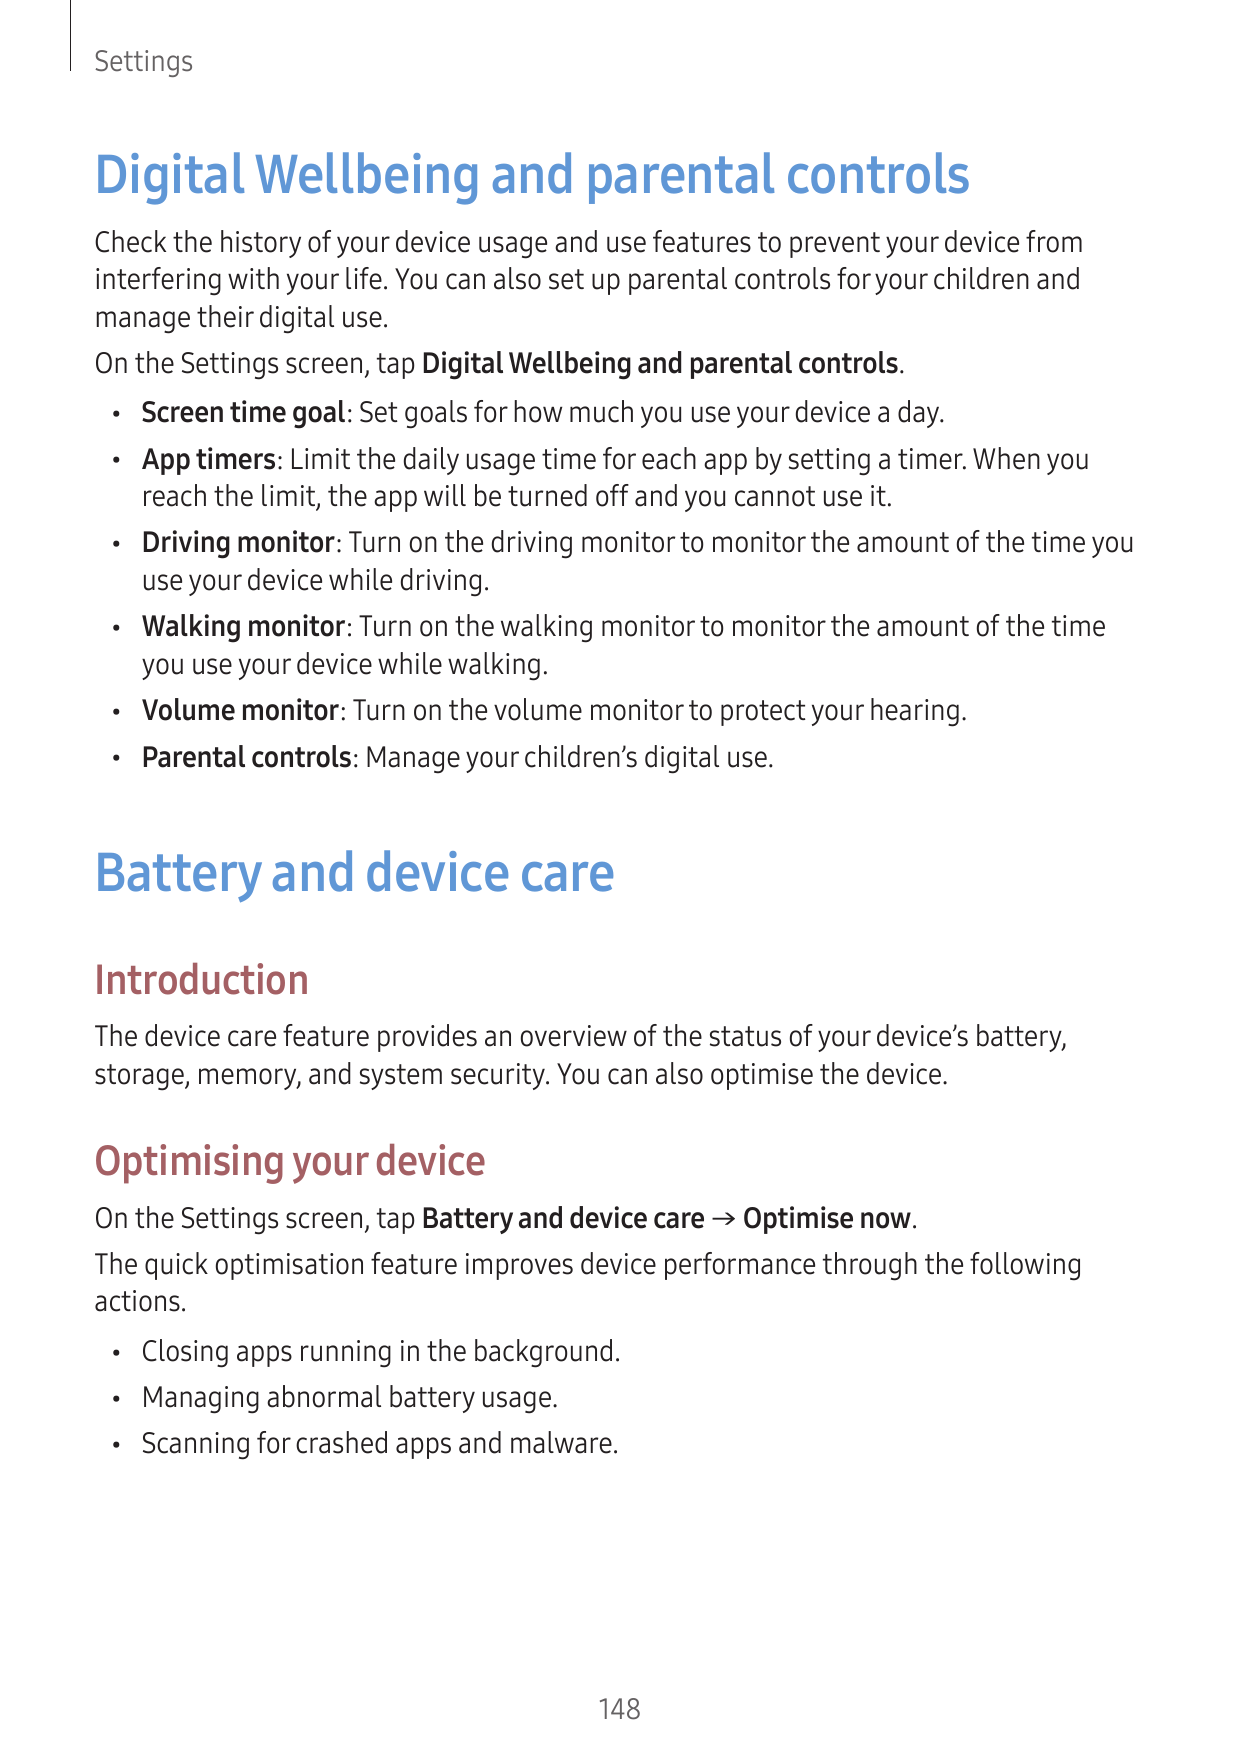 SettingsDigital Wellbeing and parental controlsCheck the history of your device usage and use features to prevent your device fr